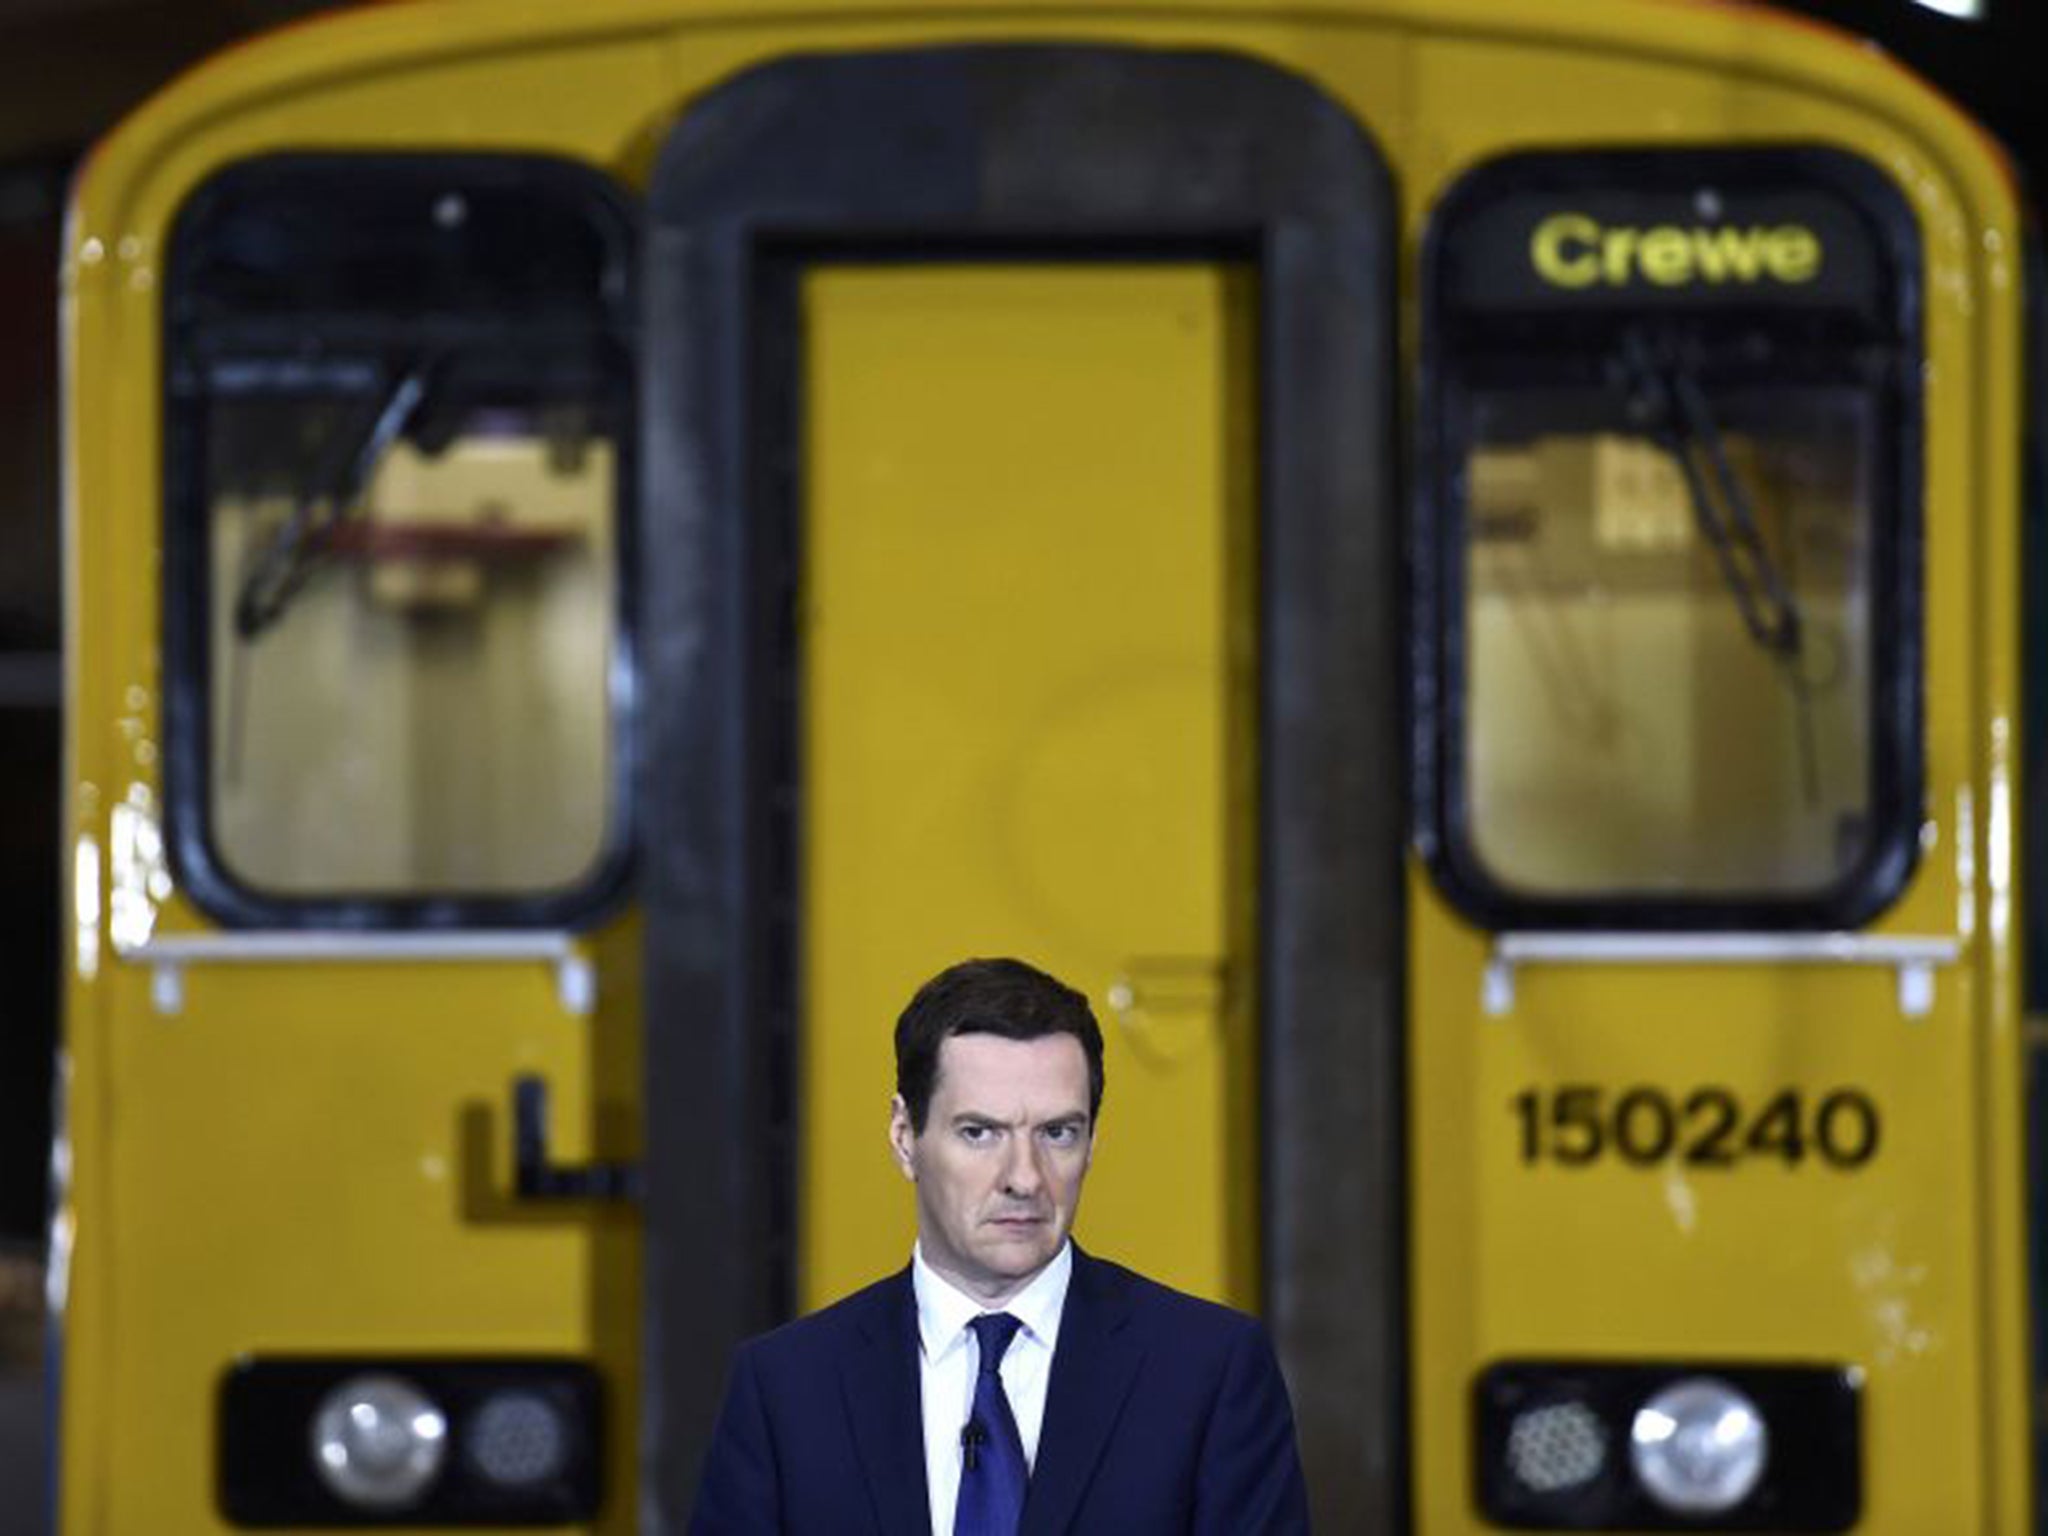 Critics say it’s dishonest for George Osborne to claim he’s protecting police spending when his pledge does not include policing public transport